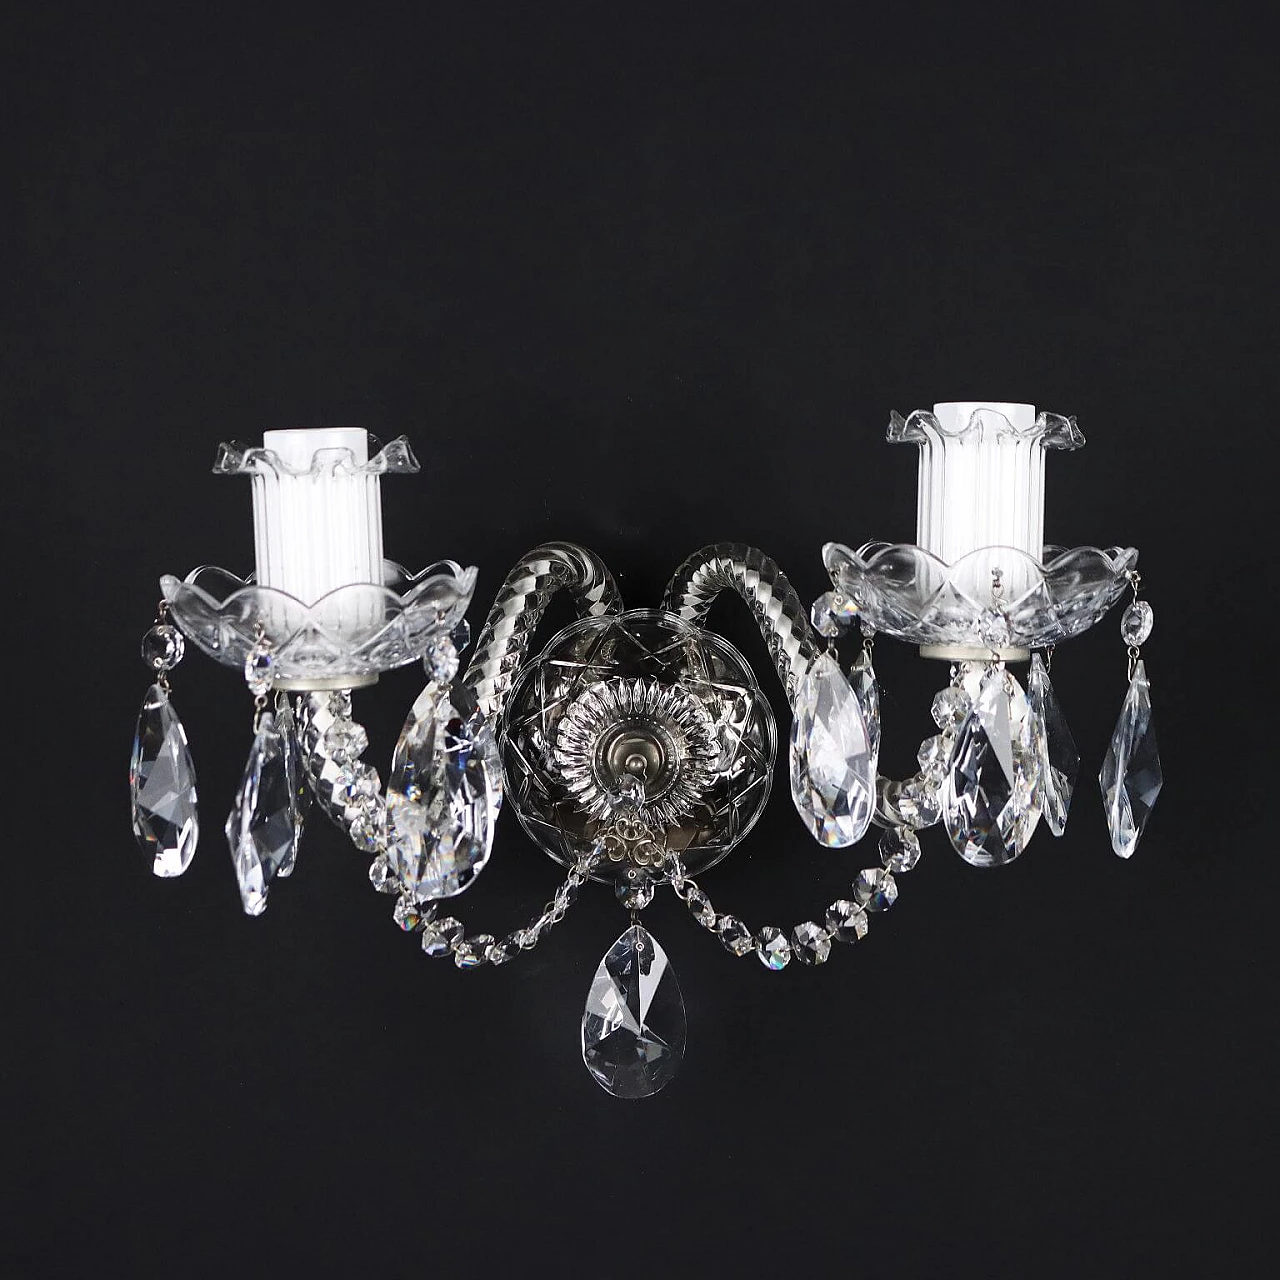 Two-light wall sconce with crystal arms, bobeches and pendants 1